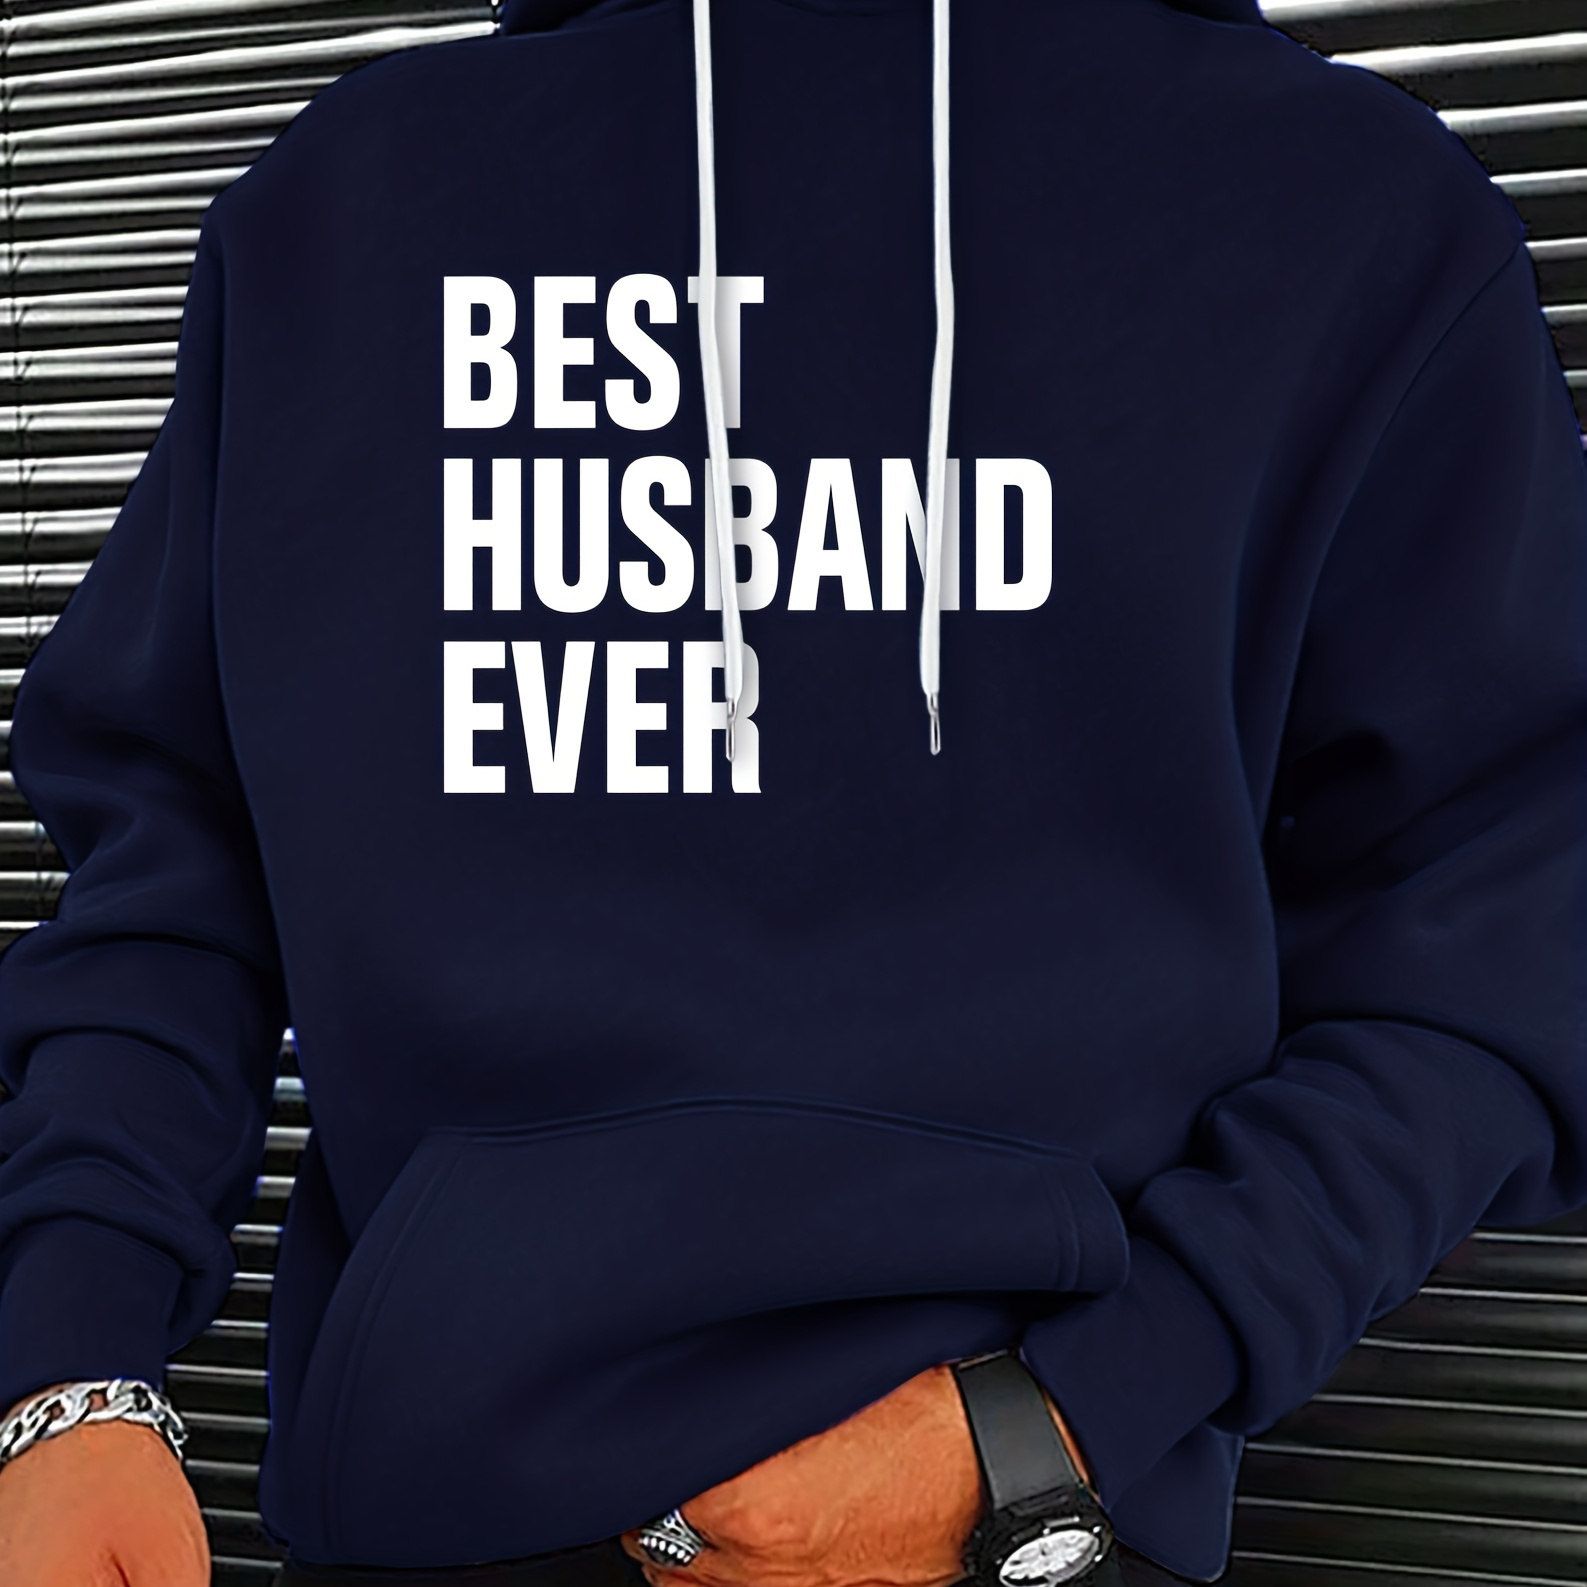 

bast Husband Ever" Print, Hoodies For Men, Graphic Sweatshirt With Kangaroo Pocket, Comfy Trendy Hooded Pullover, Mens Clothing For Fall Winter